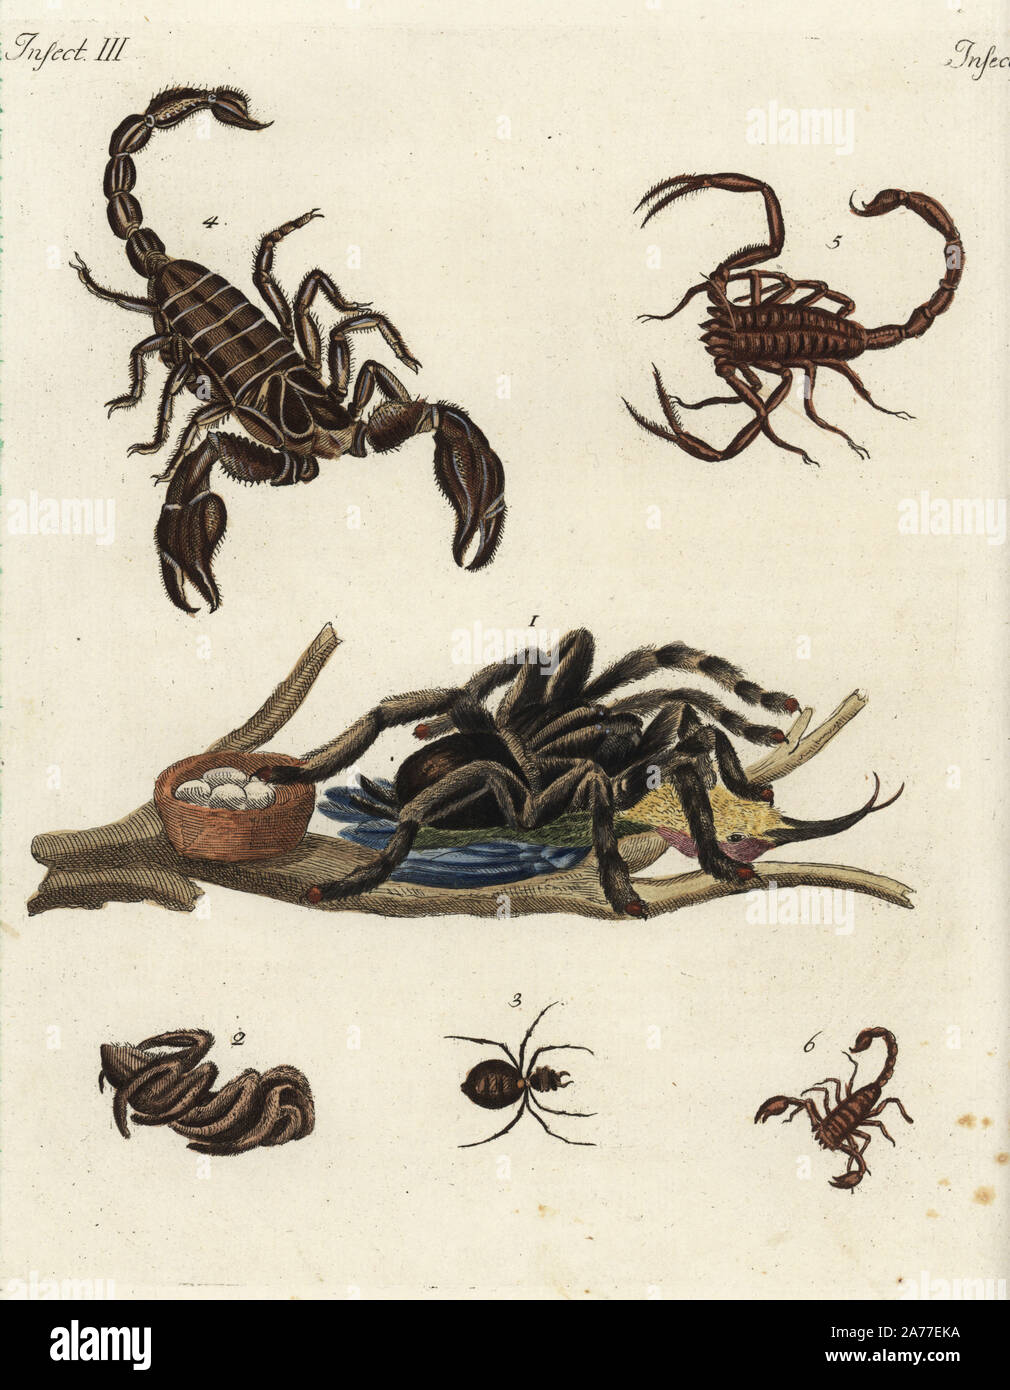 Goliath bird-eating spider, Theraphosa blondi, with hummingbird 1, Italian tarantula, Lycosa tarantula 2, orange spider of Curacao 3, and species of scorpions of India 4, America 5, and Europe 6. Handcoloured copperplate engraving from Friedrich Johann Bertuch's 'Bilderbuch fur Kinder' (Picture Book for Children), Weimar, 1792. Stock Photo